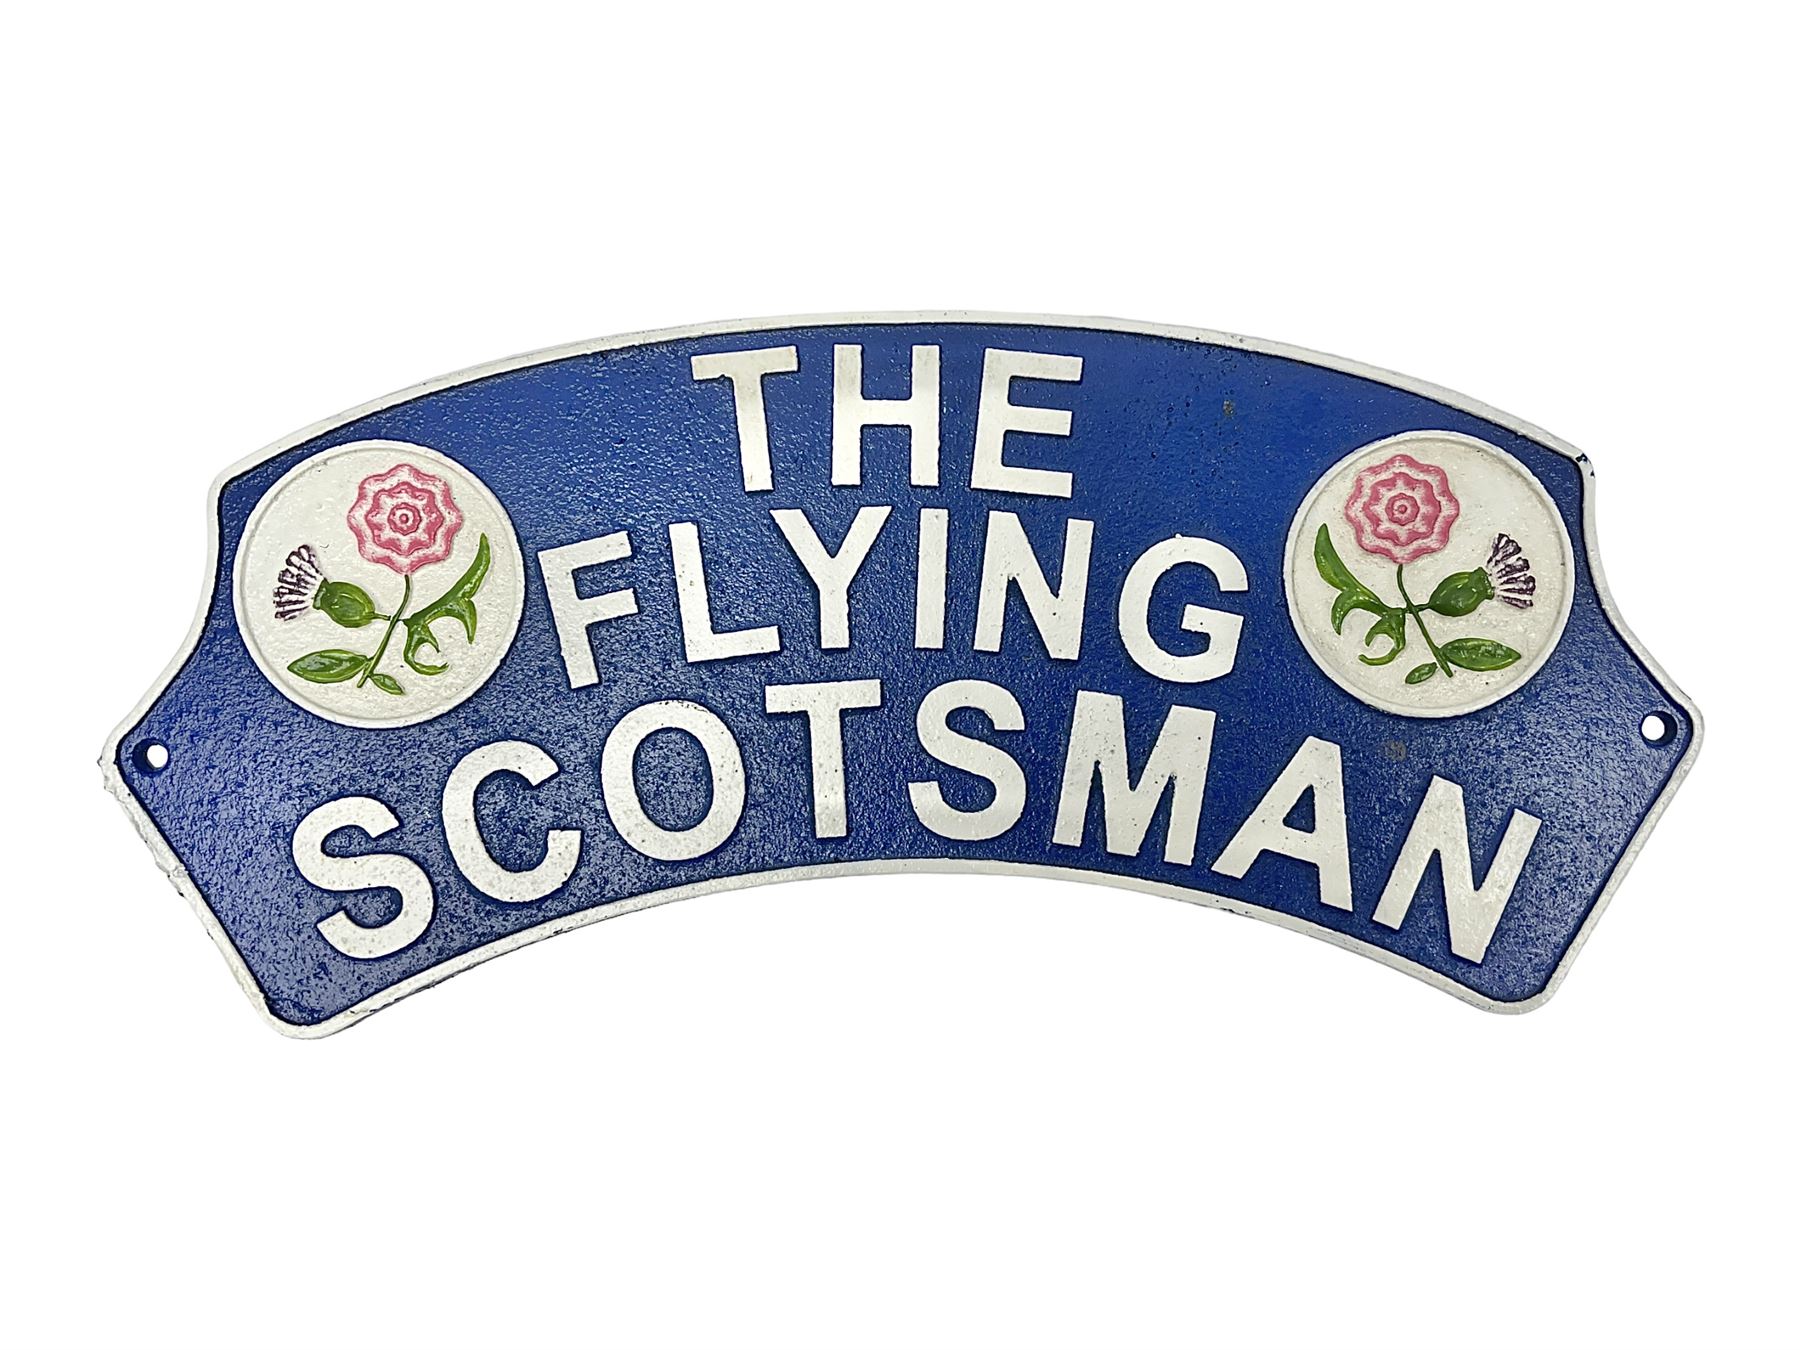 Cast metal 'The Flying Scotsman' type sign